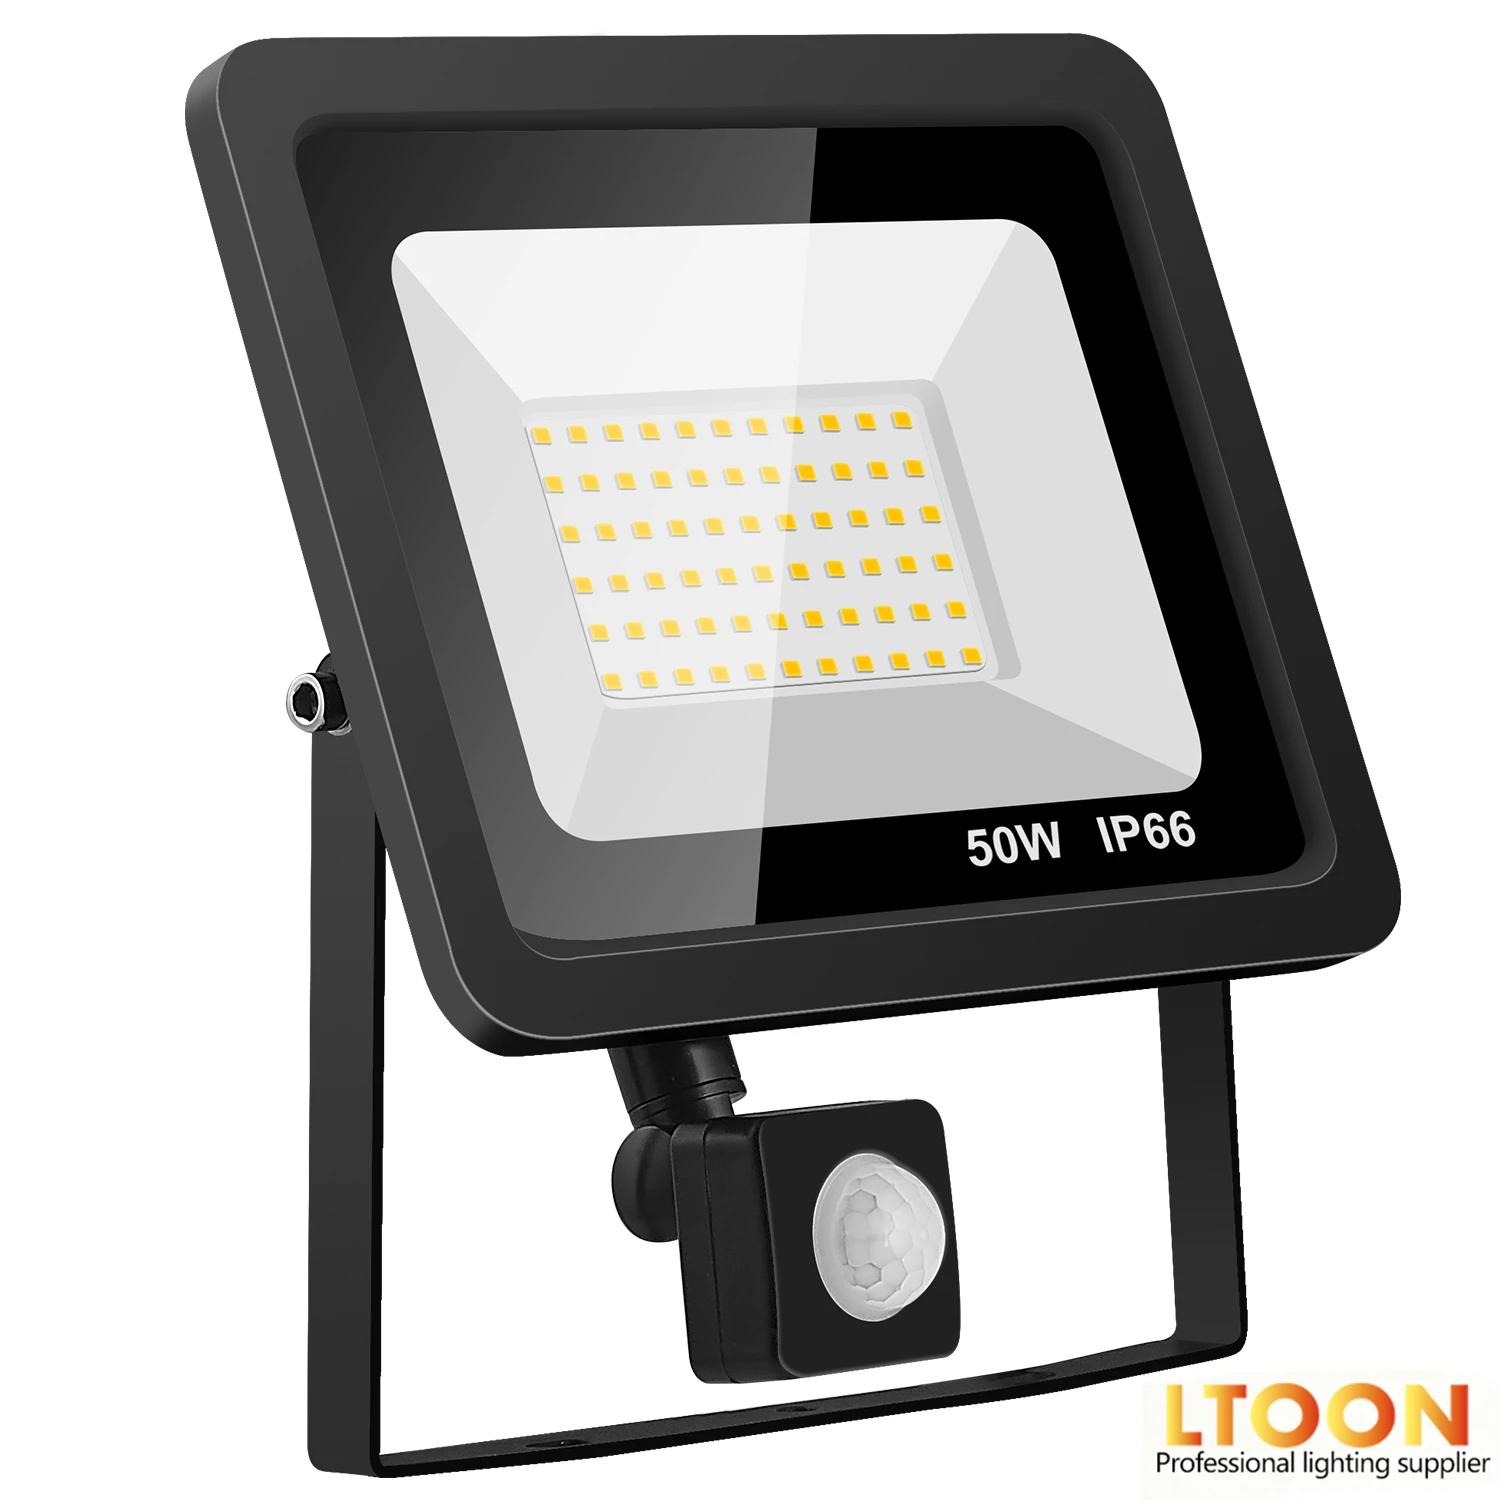 [LTOON]10W 20W 30W 50W 100W Led Flood Light With Adjustable PIR Sensor SMD 2835 Floodlights Outdoor Lighting For Street Square solar led light with timing off function powered high power 25w 100w floodlights with solar panel and remote controller